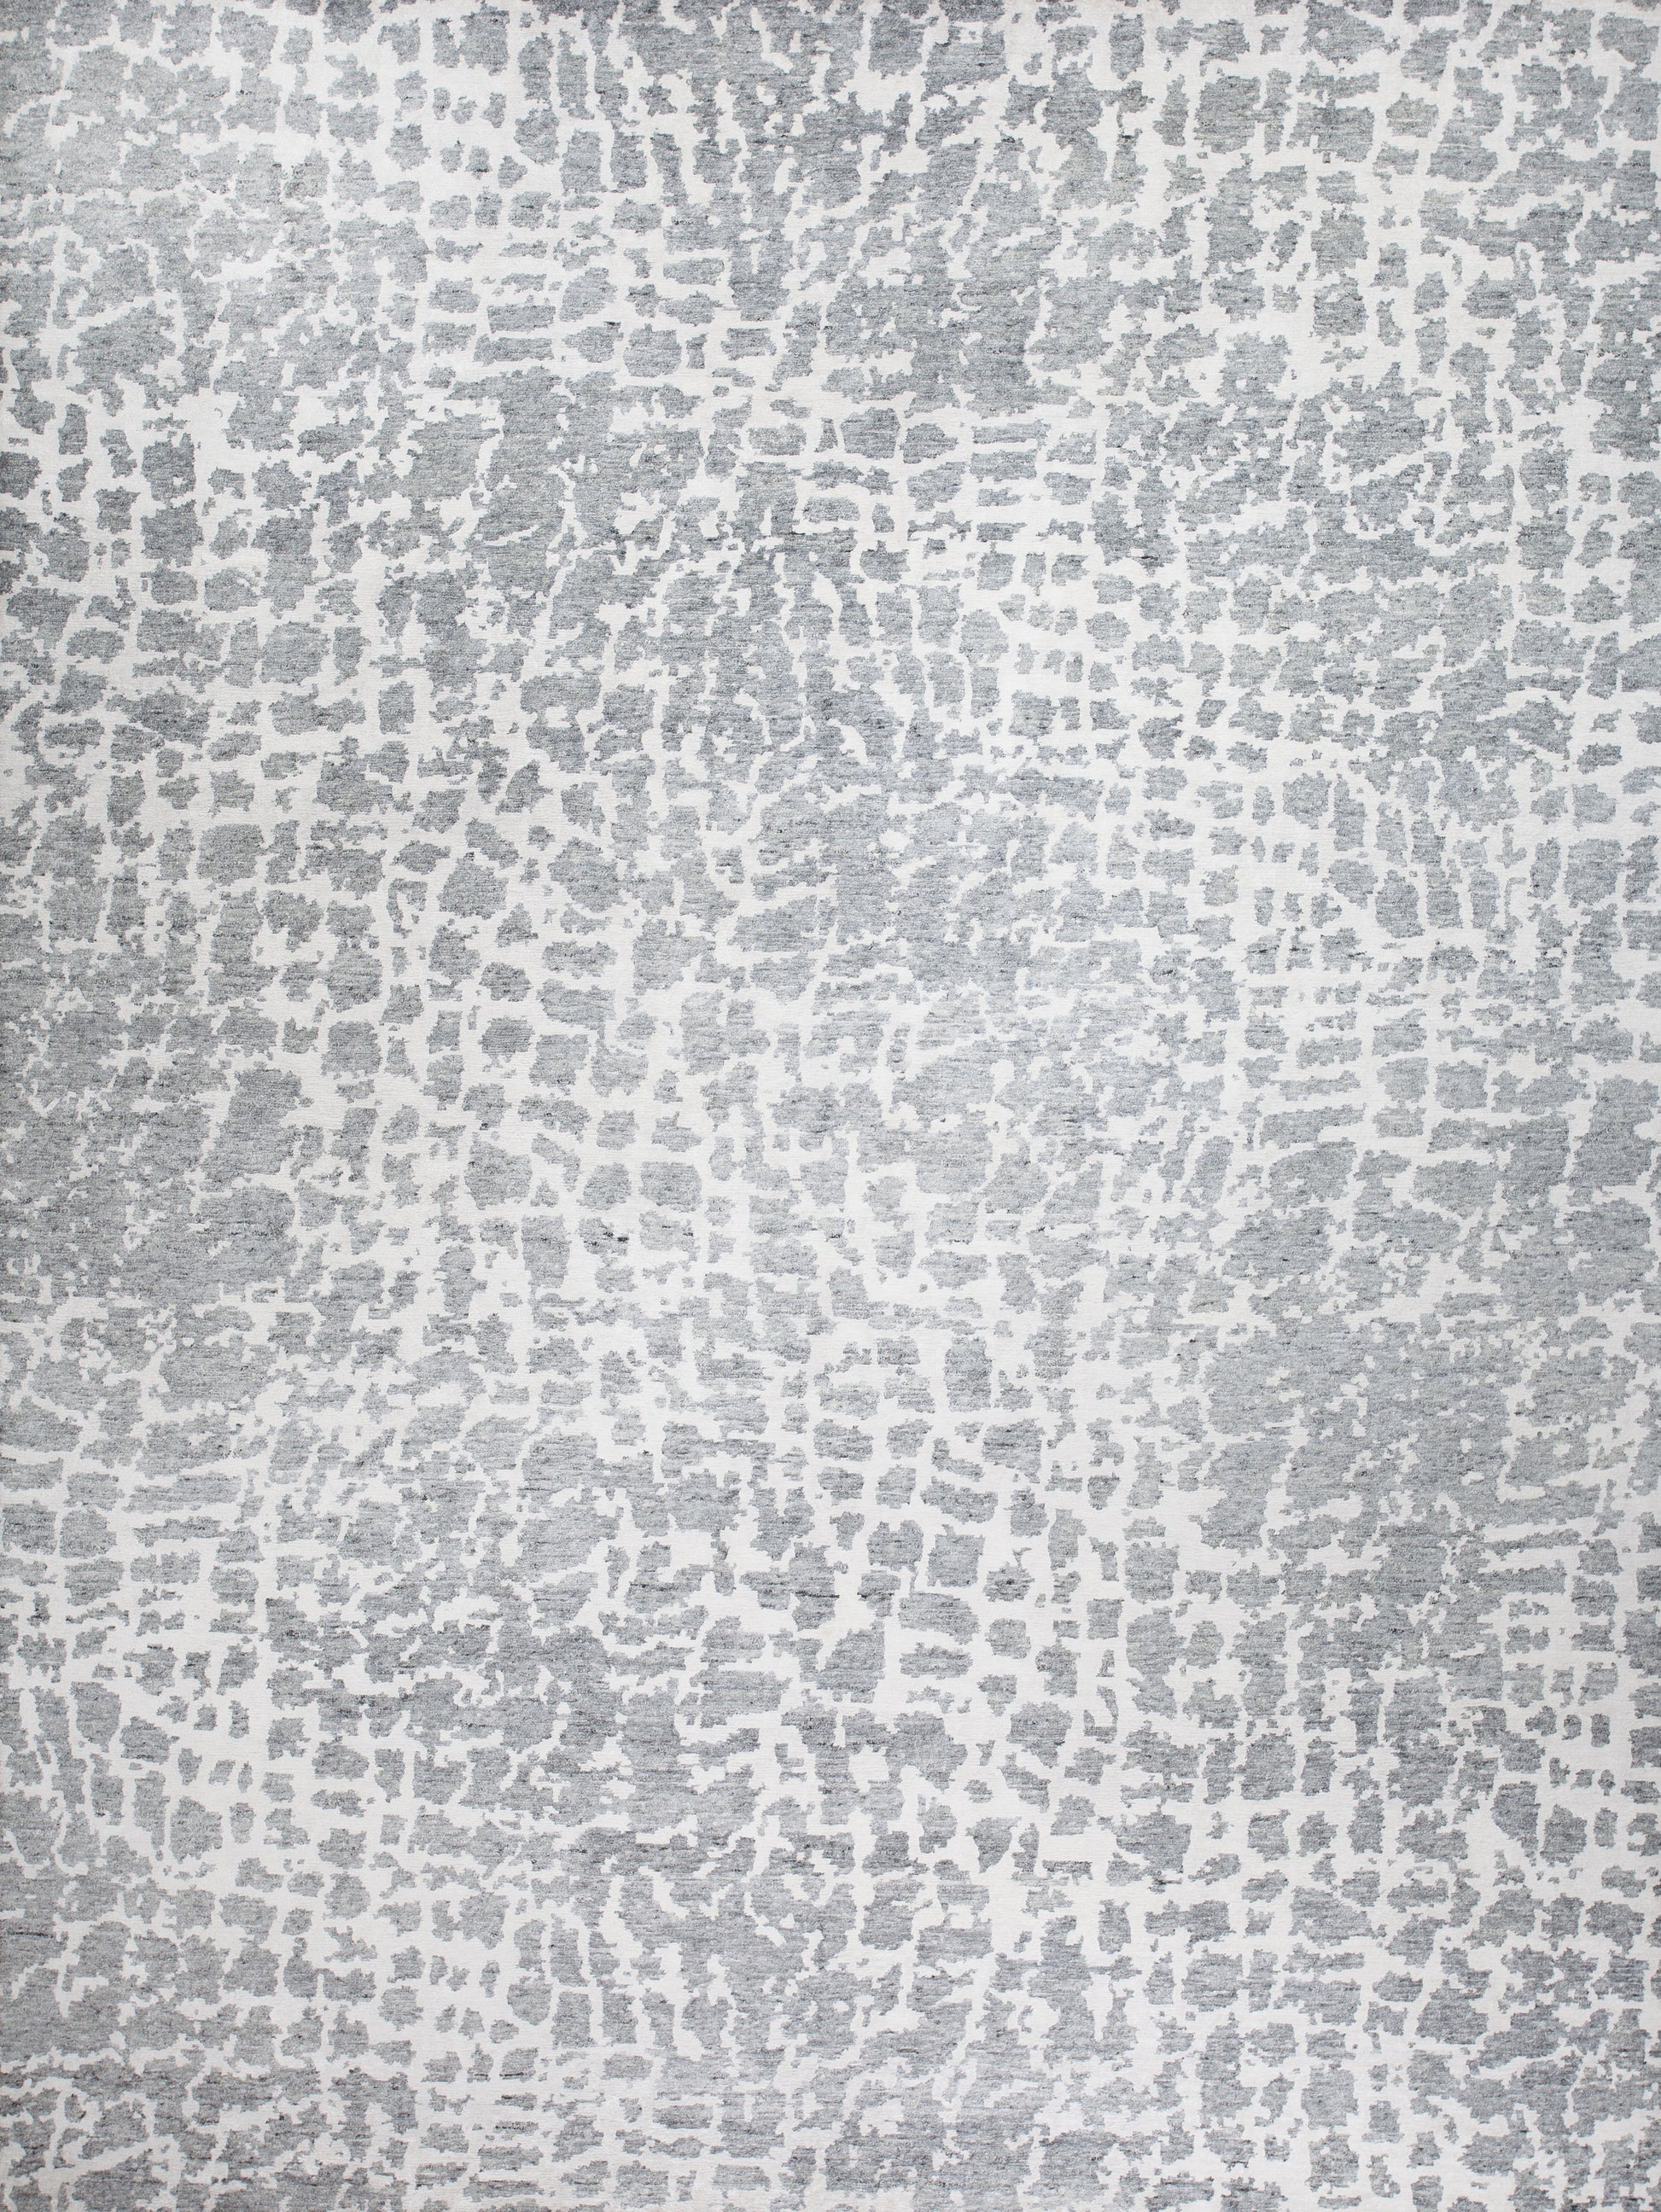 Modern rug comes with a gray spot pattern over white background. 